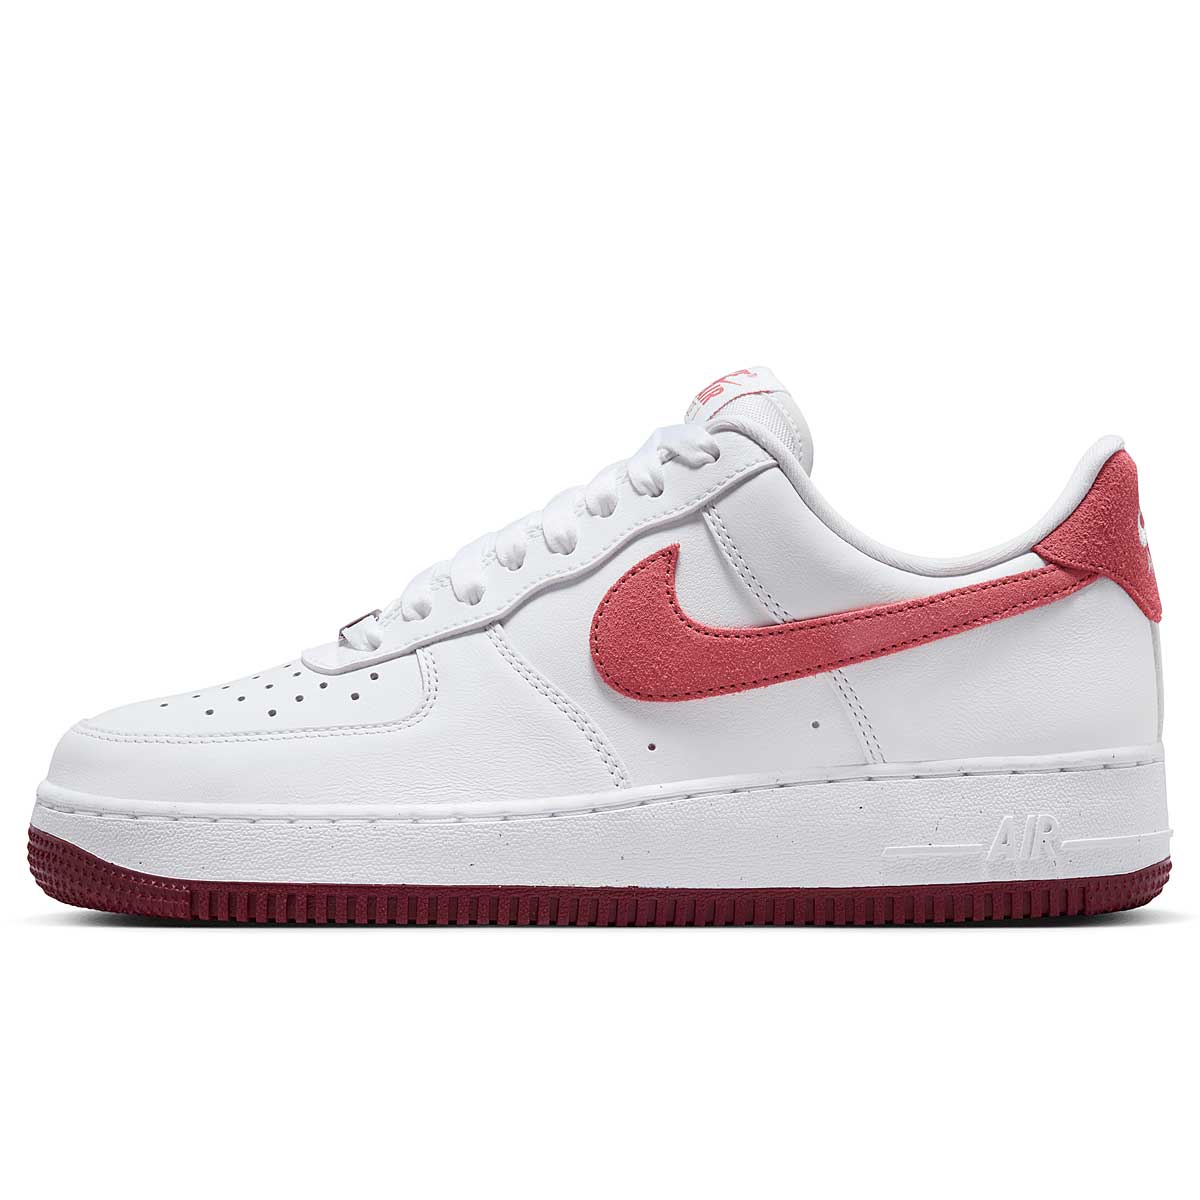 Buy WMNS AIR FORCE 1 ‘07 for EUR 94.90 on KICKZ.com!